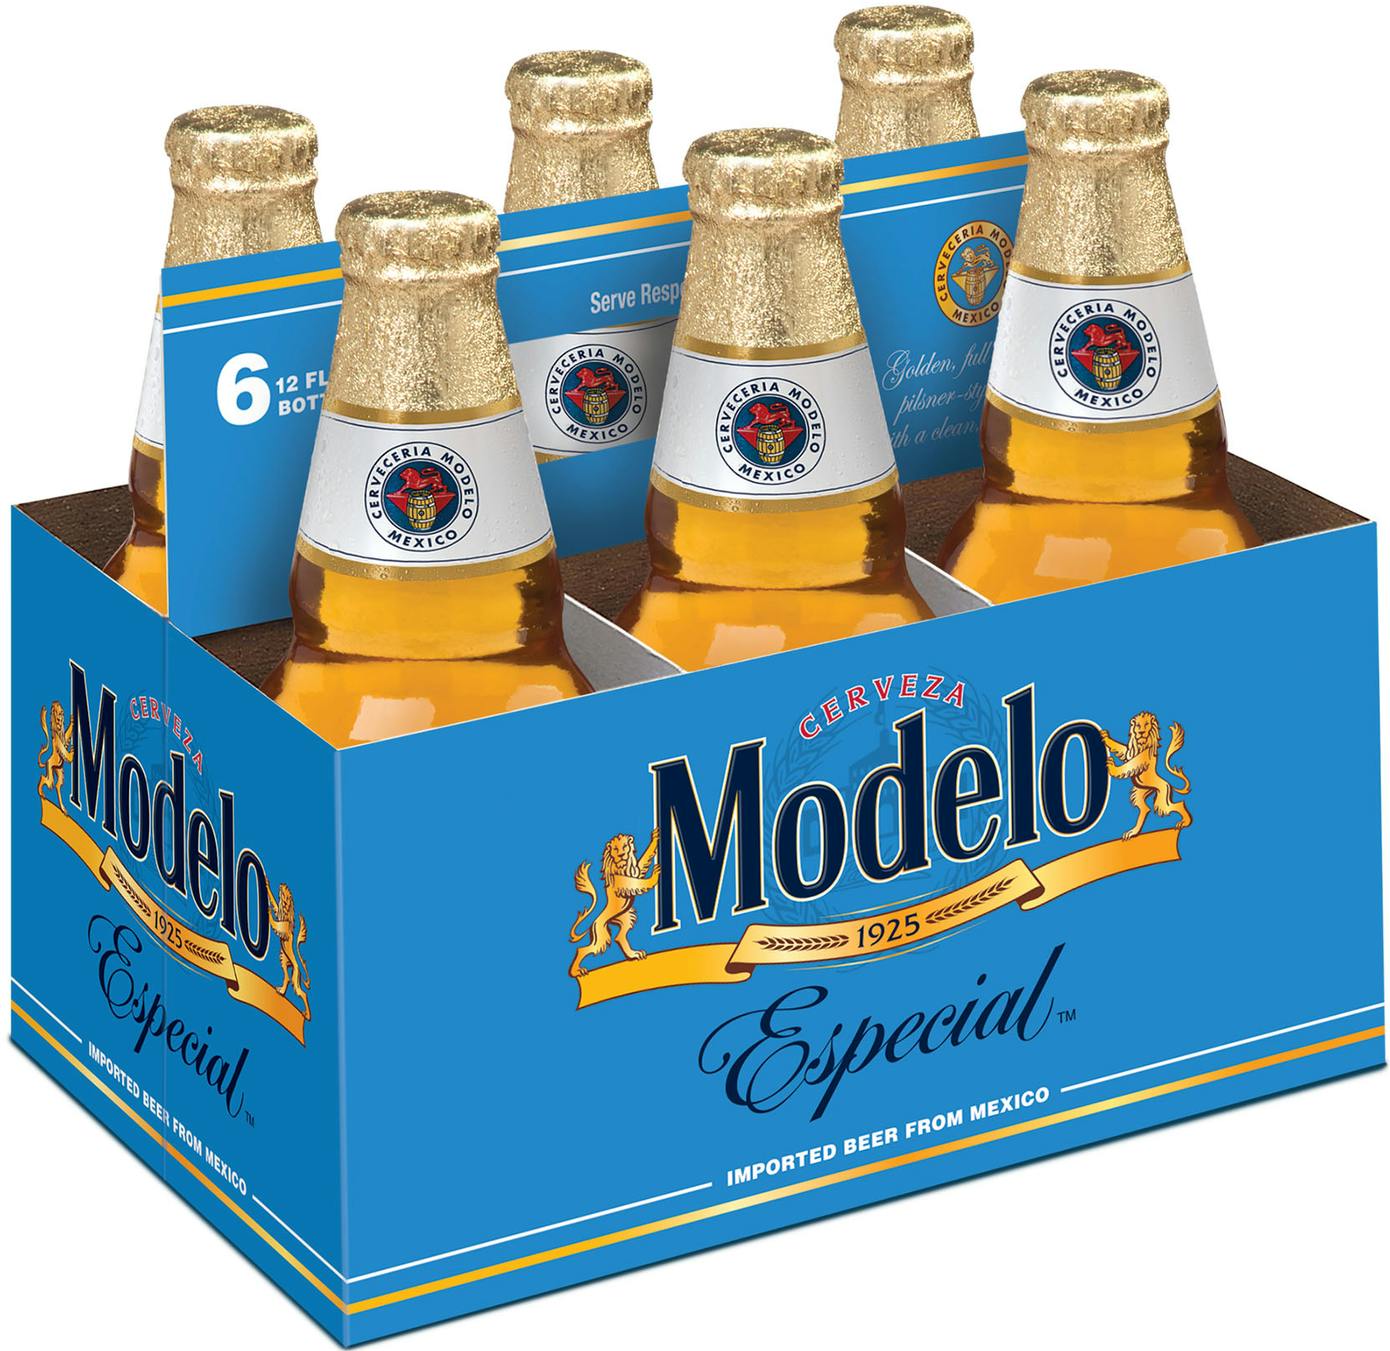 Modelo Especial Mexican Lager Import Beer, 12 cans / 12 fl oz - Foods Co.